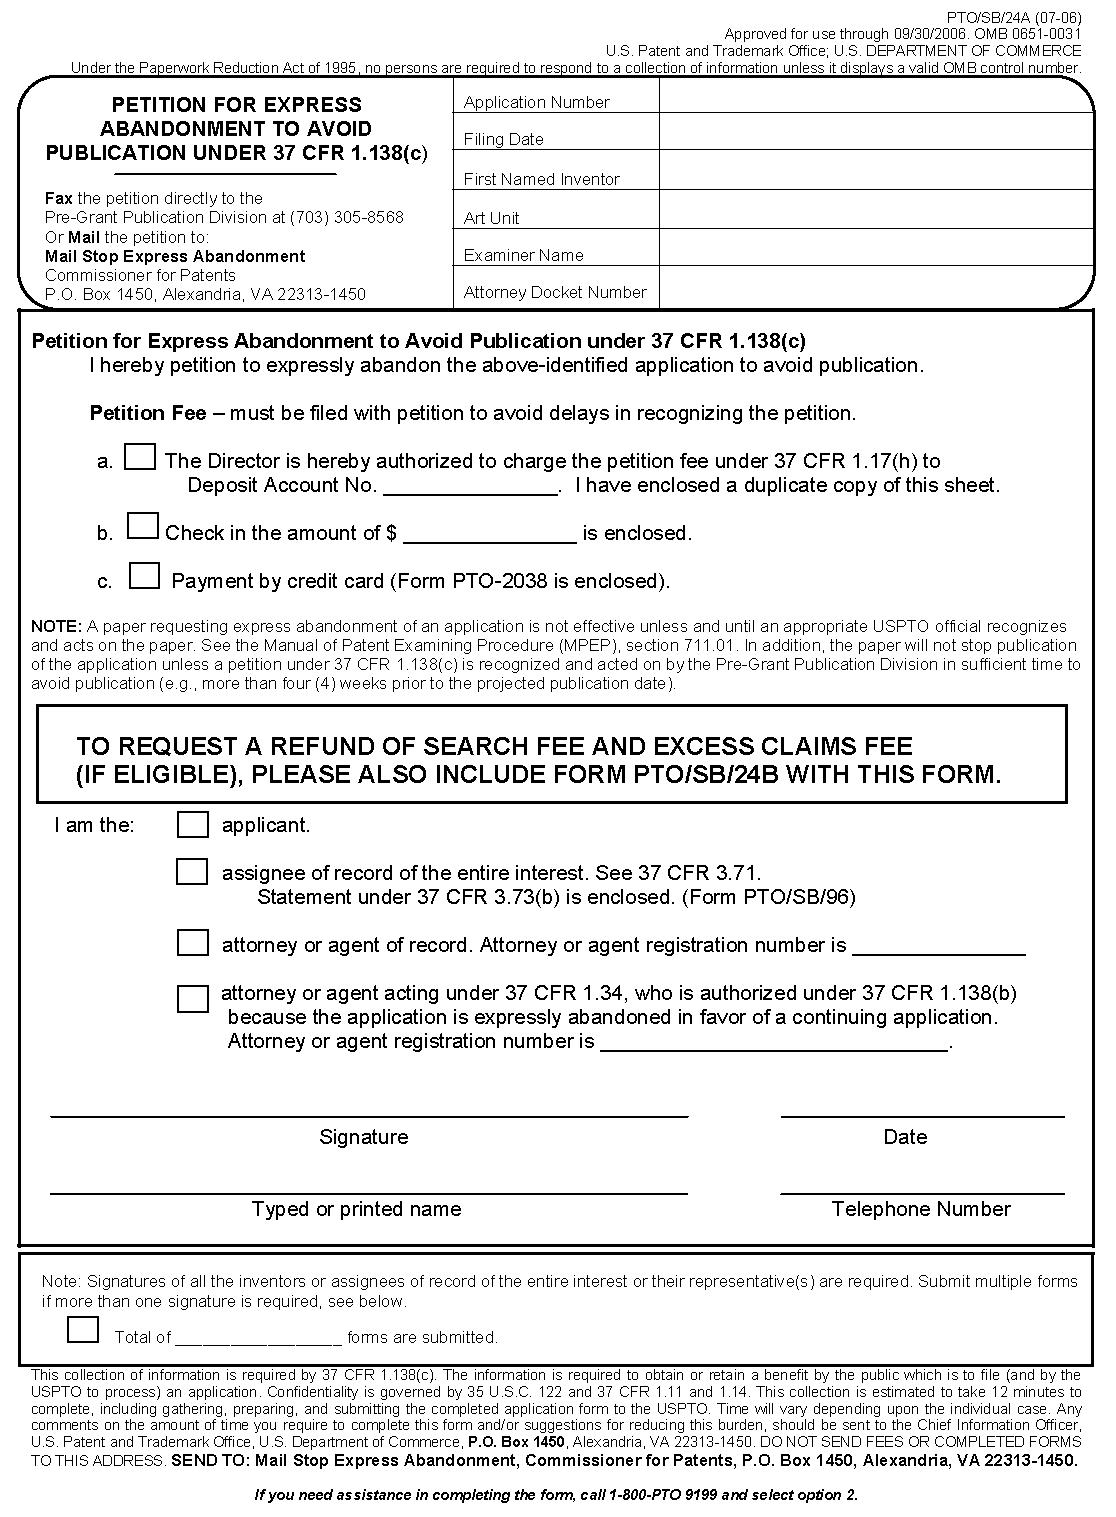 form pto/sb/24a petition for express abandonment to avoid publication under 37 cfr 1.138(c) 